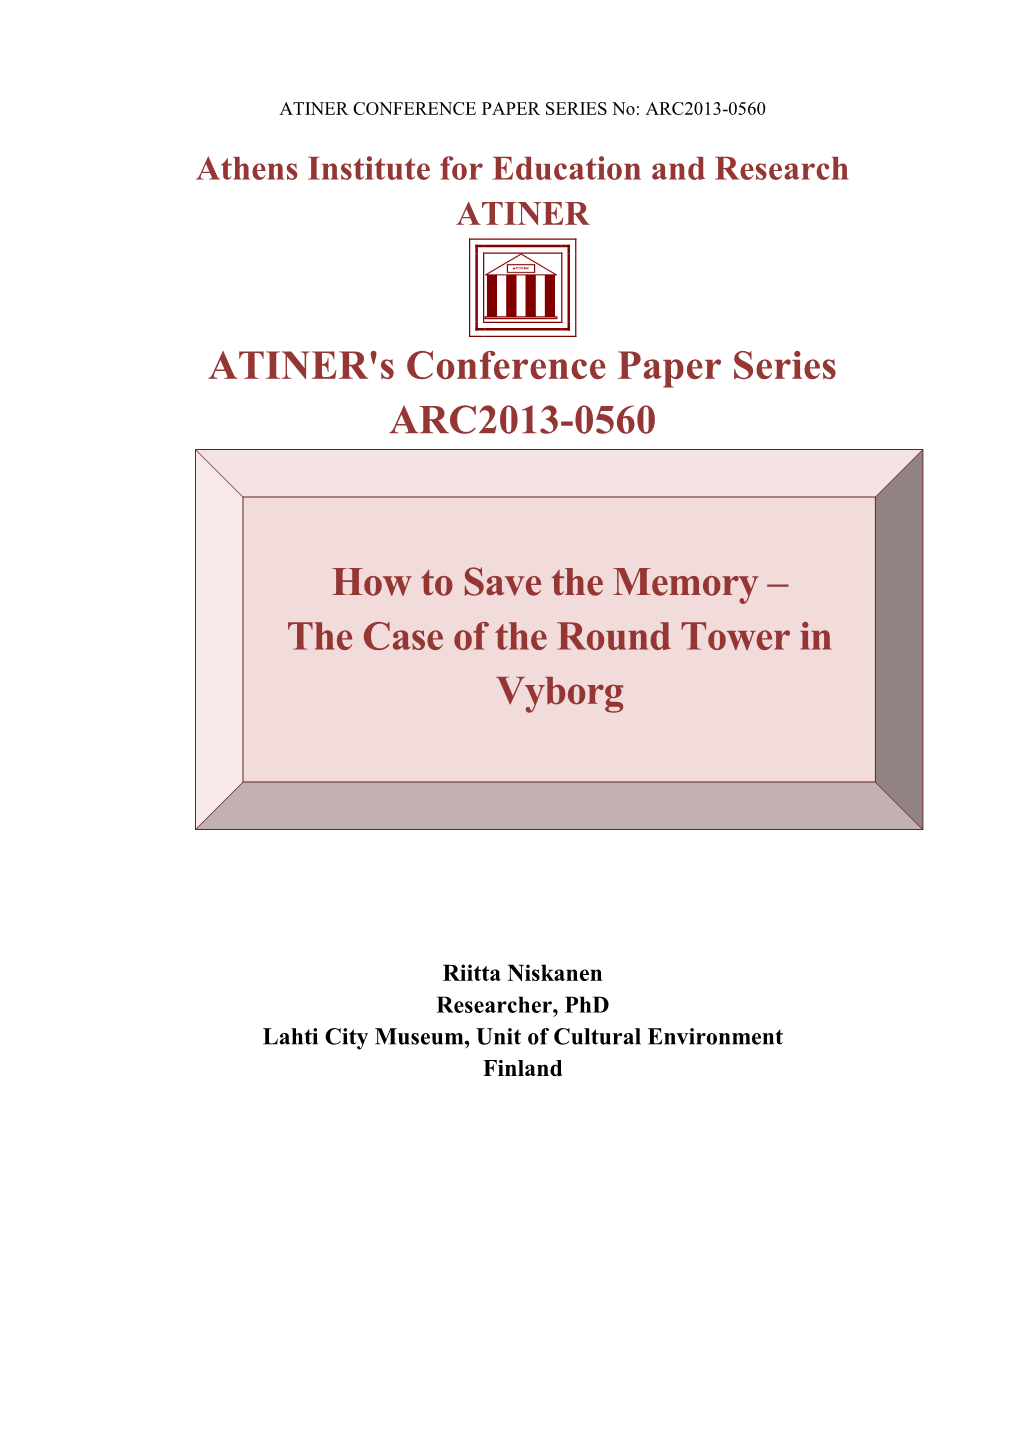 ATINER's Conference Paper Series ARC2013-0560 How to Save The